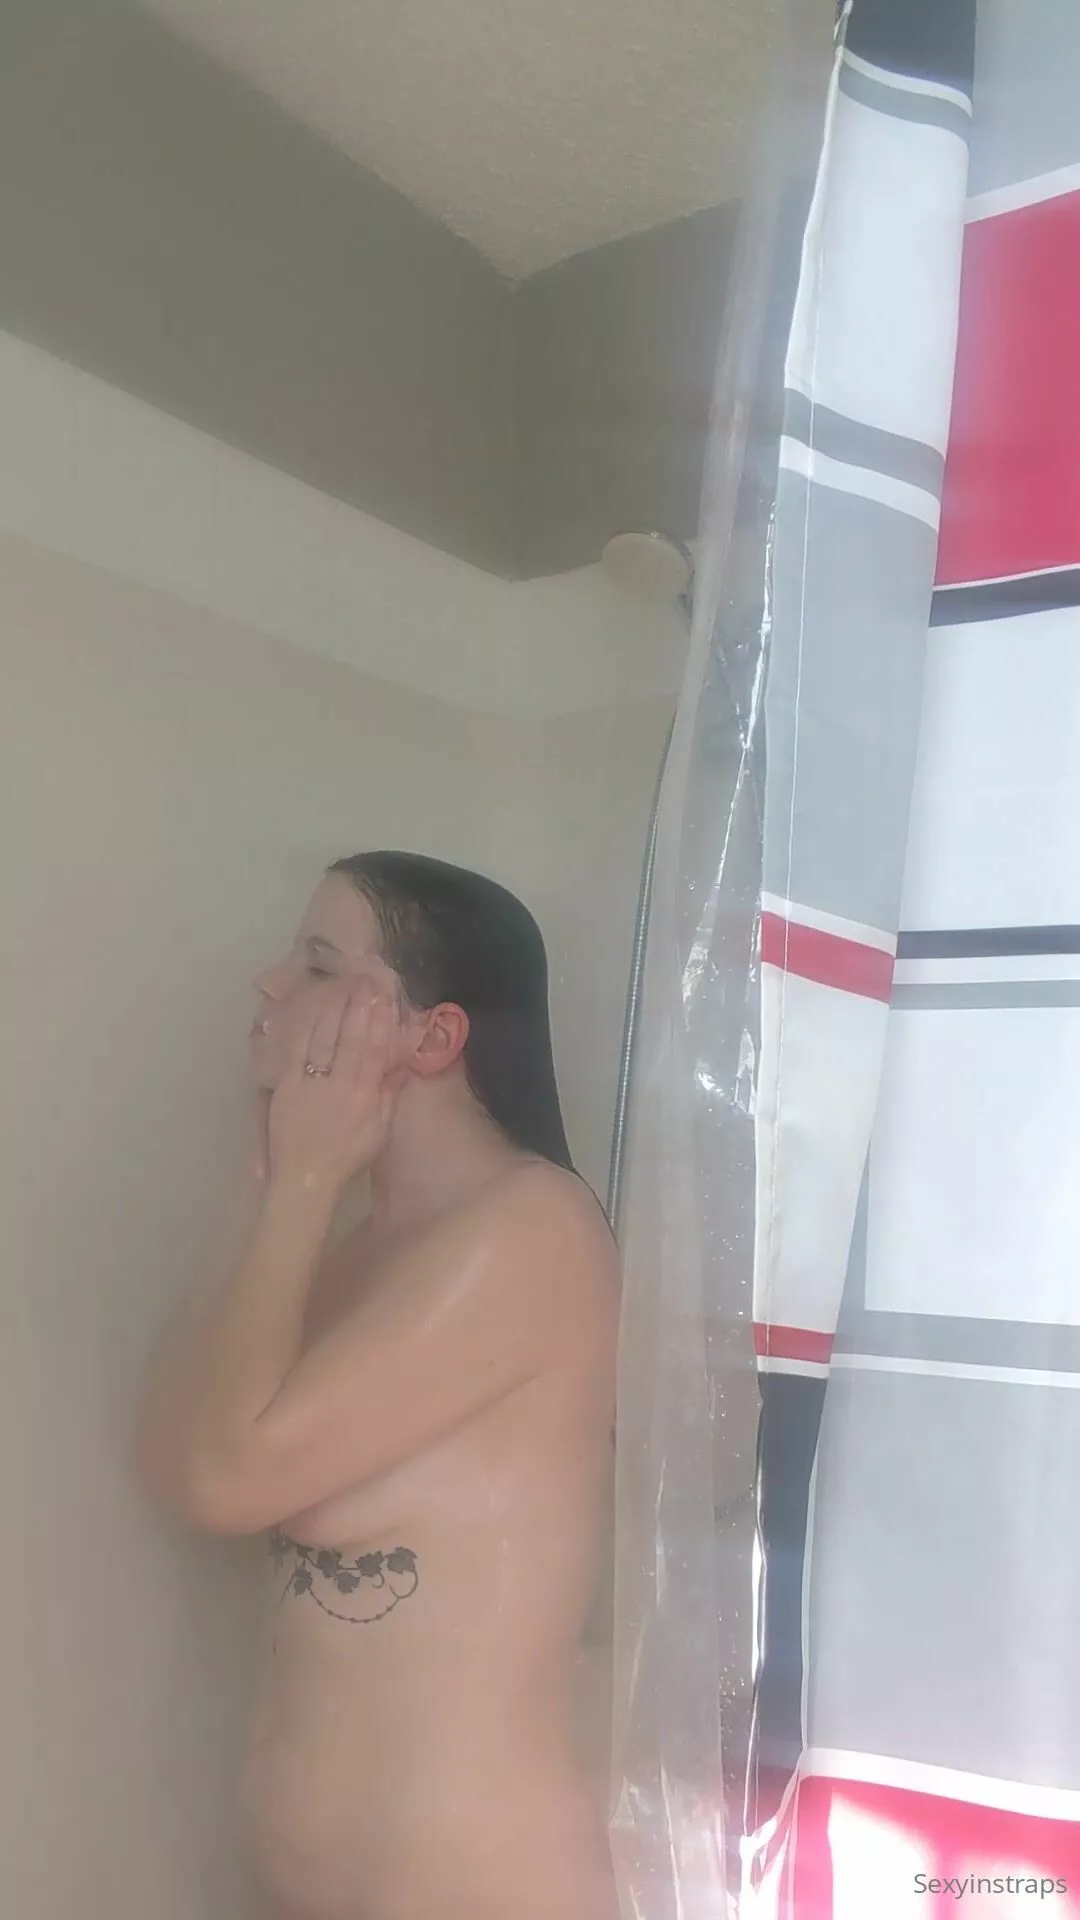 Sexyinstraps come watch me shower peeping tom voyeur style xxx onlyfans porn videos pic